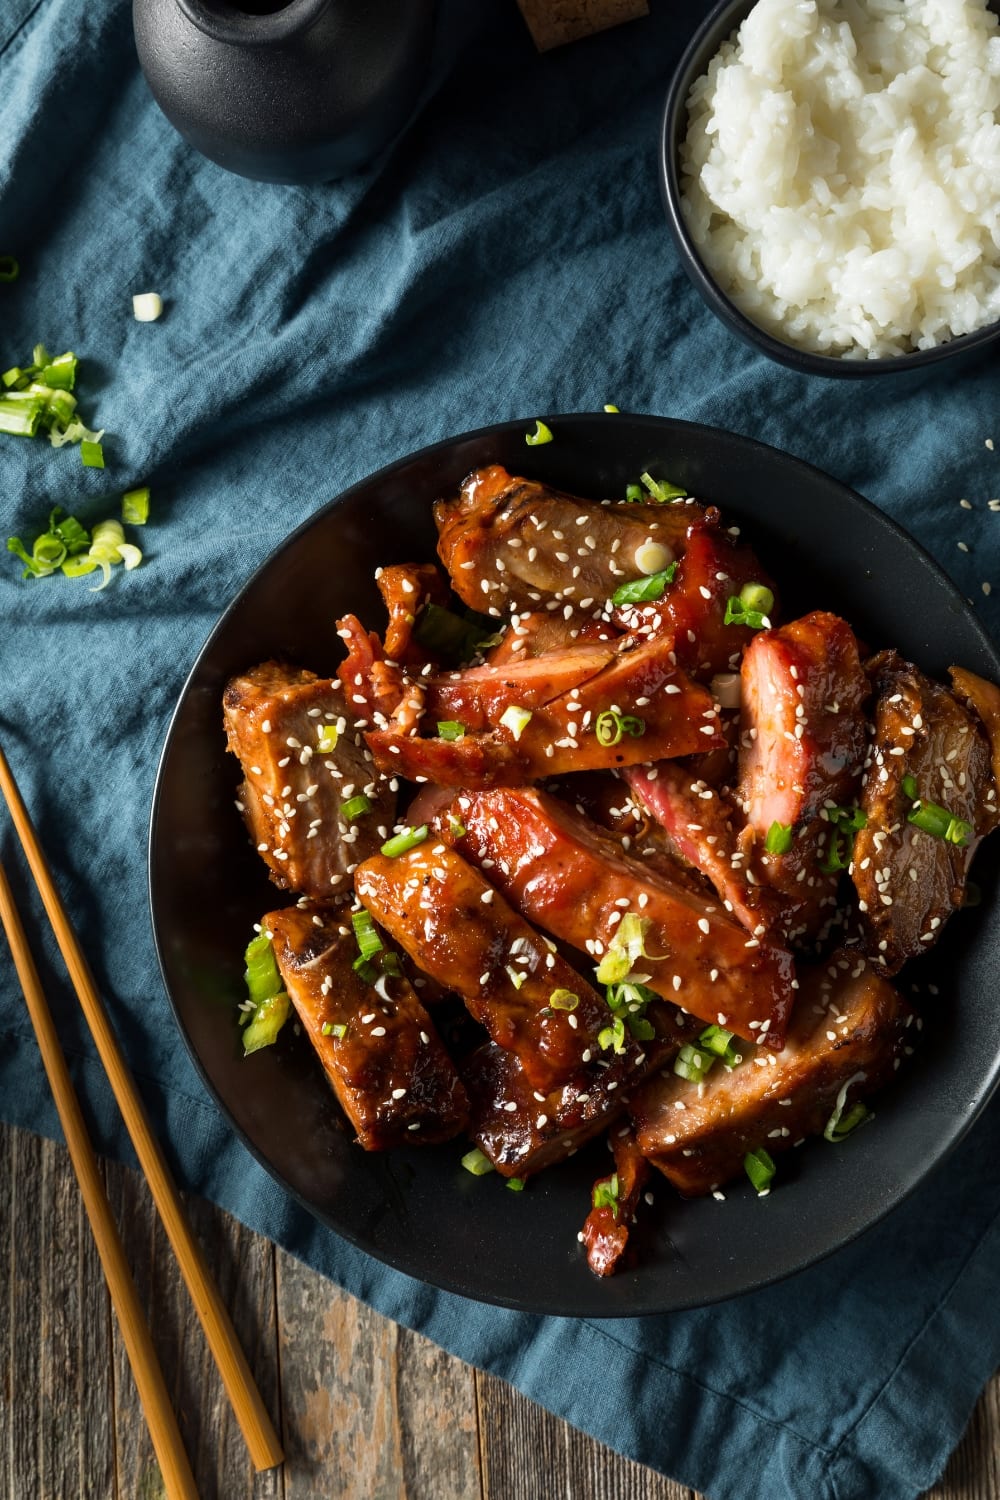 Bowl of White Rice and Chinese BBQ Pork Ribs Served on a Black Plate Garnished With Sesame Seeds and Chopped Onion Leeks